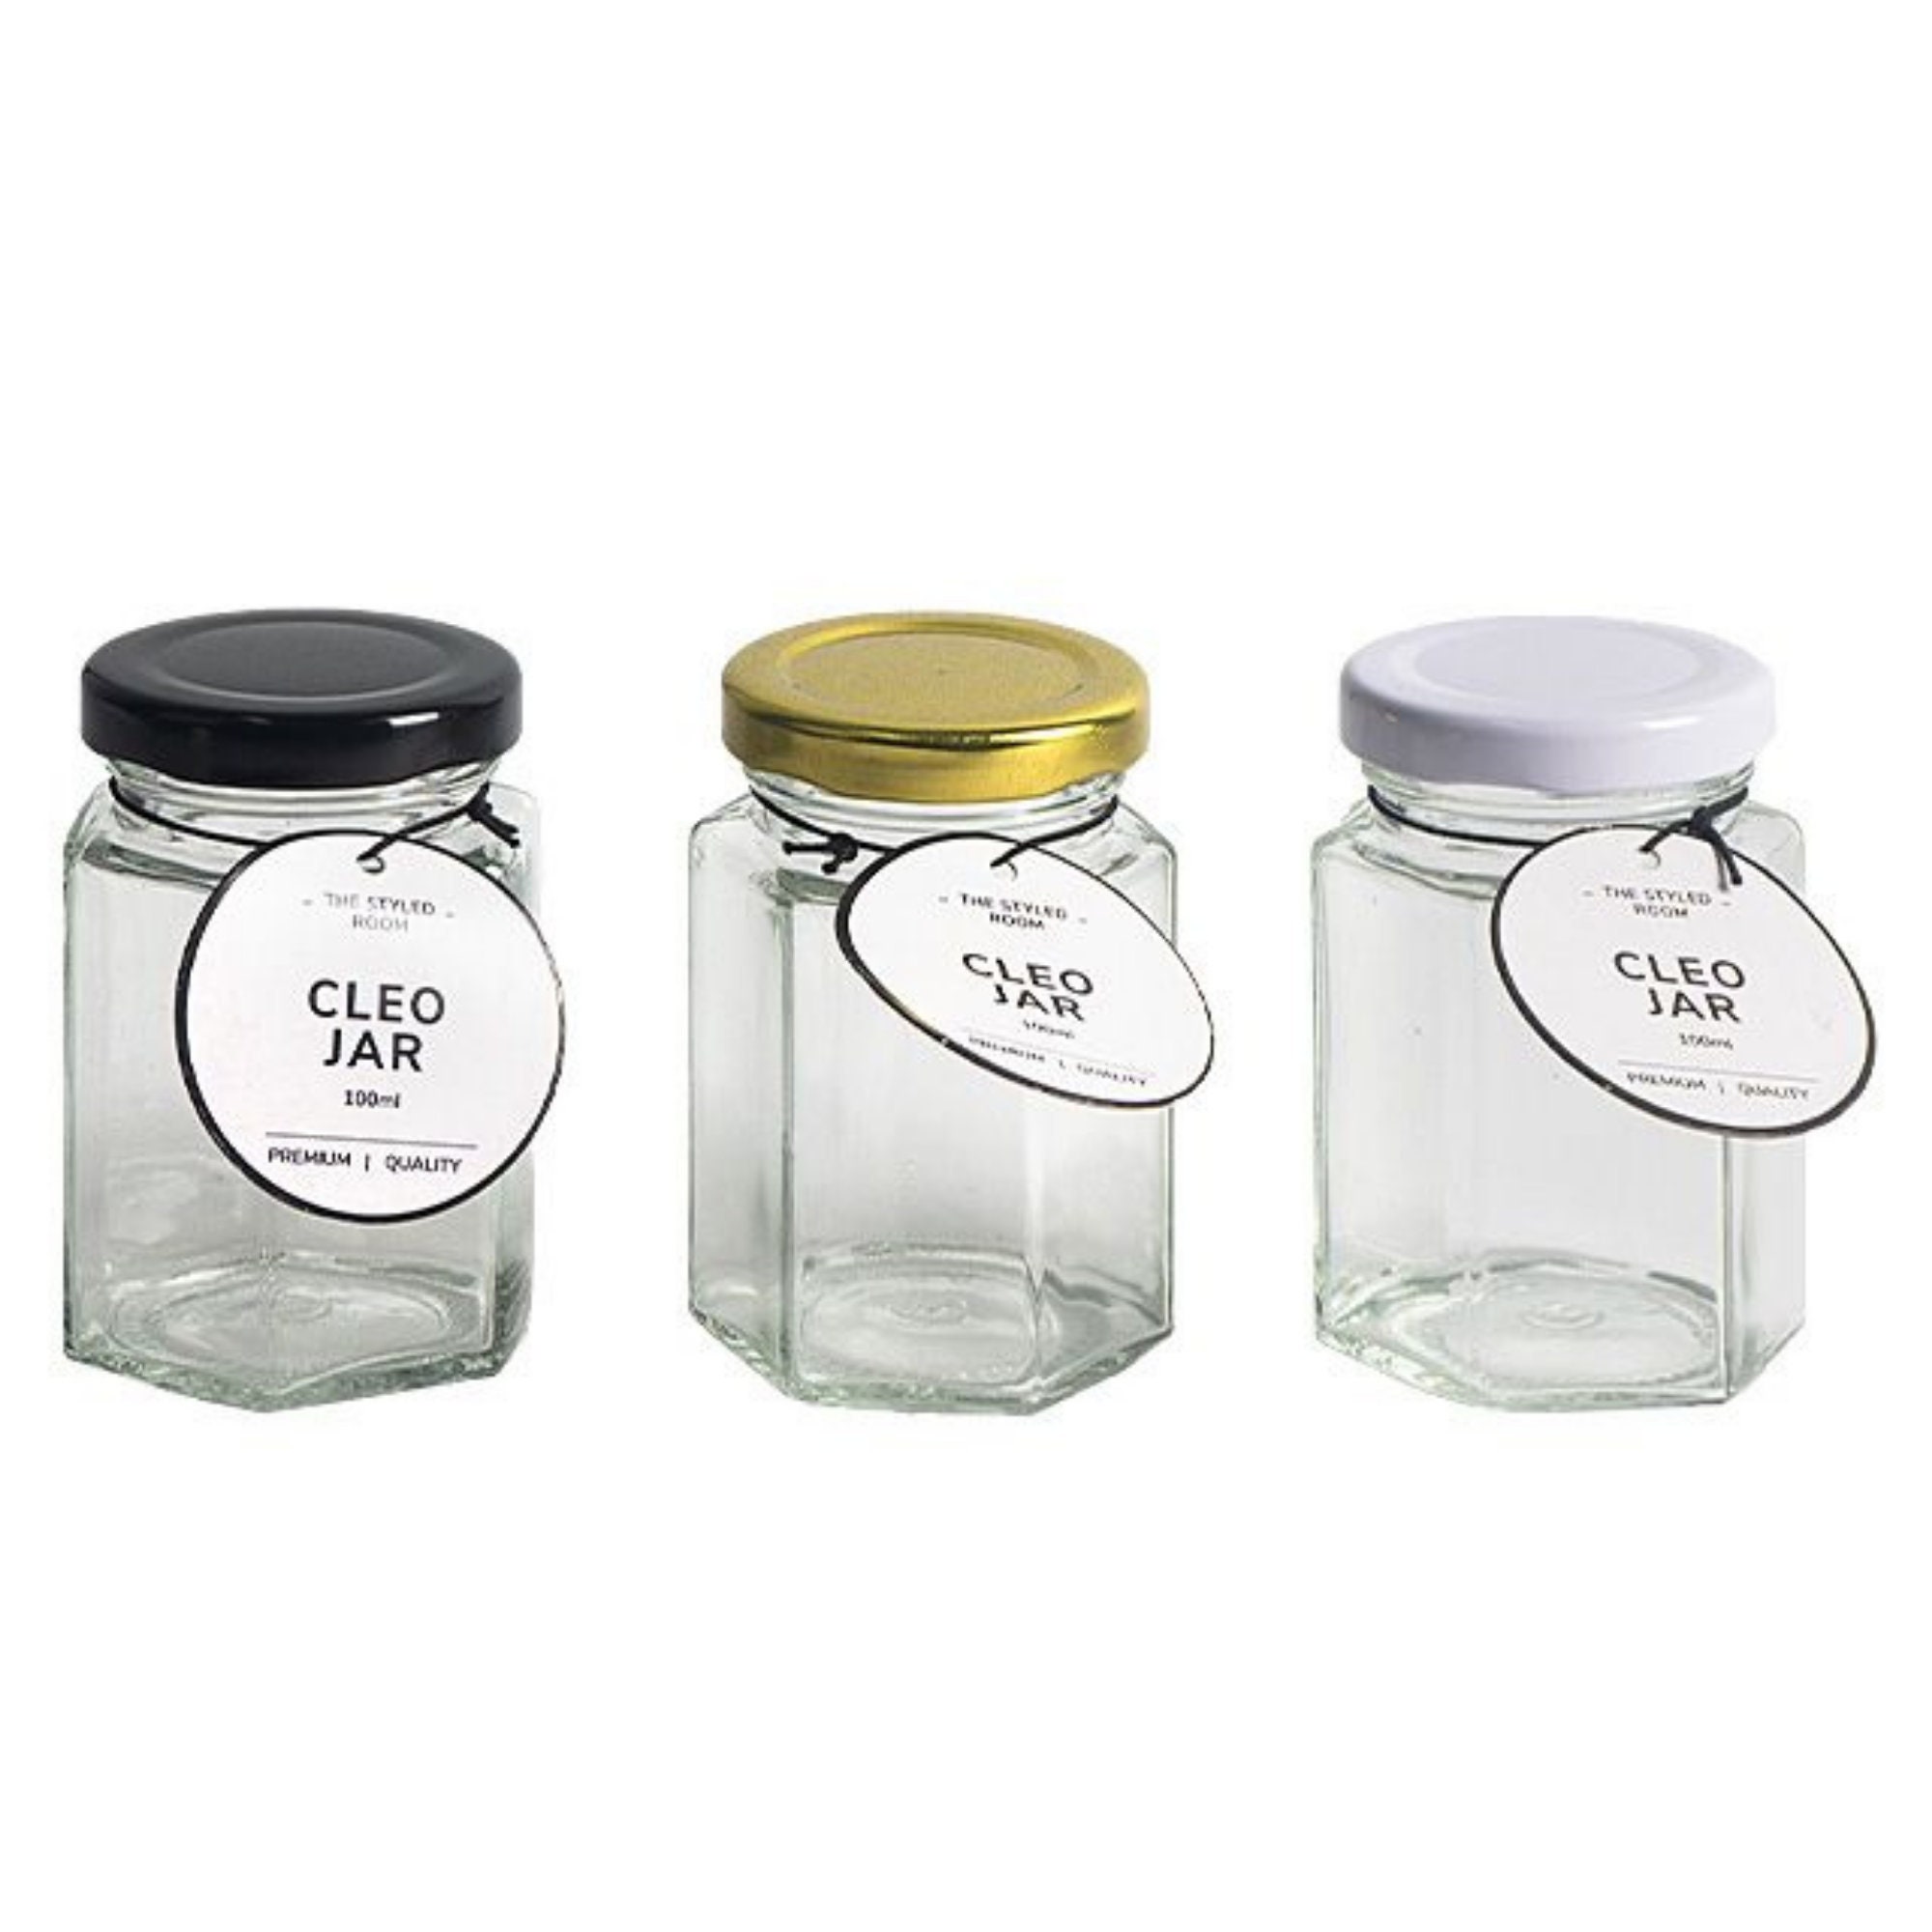 12 Pcs 6 Oz 190 Ml Square Glass Jar With Your Color Choice of Plastisol  Lined BPA Free Lid: Gold Silver Whiteblack 